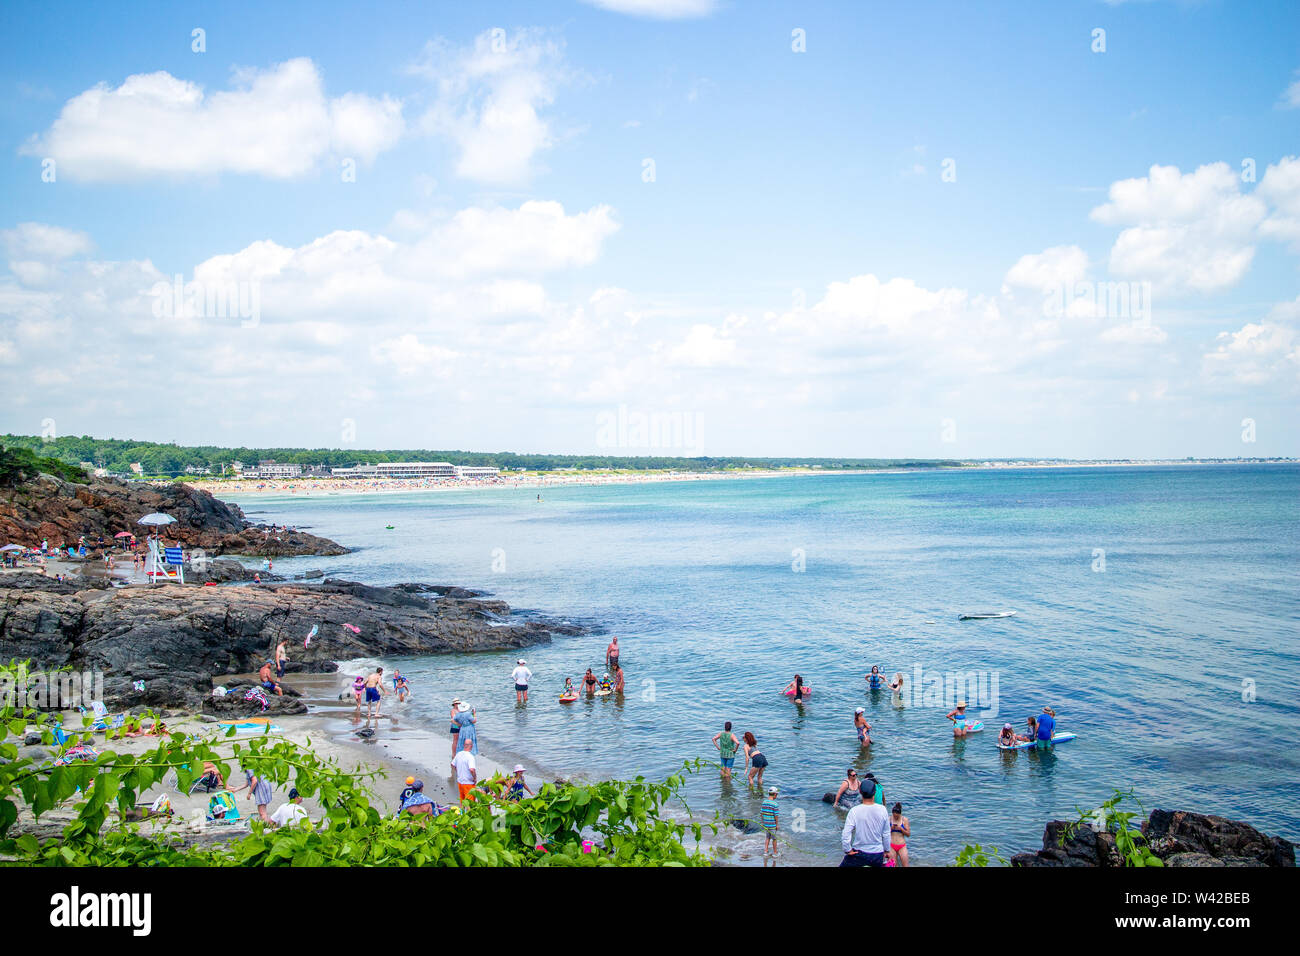 People on a small beach in Ogunquit, Maine, USA. Stock Photo